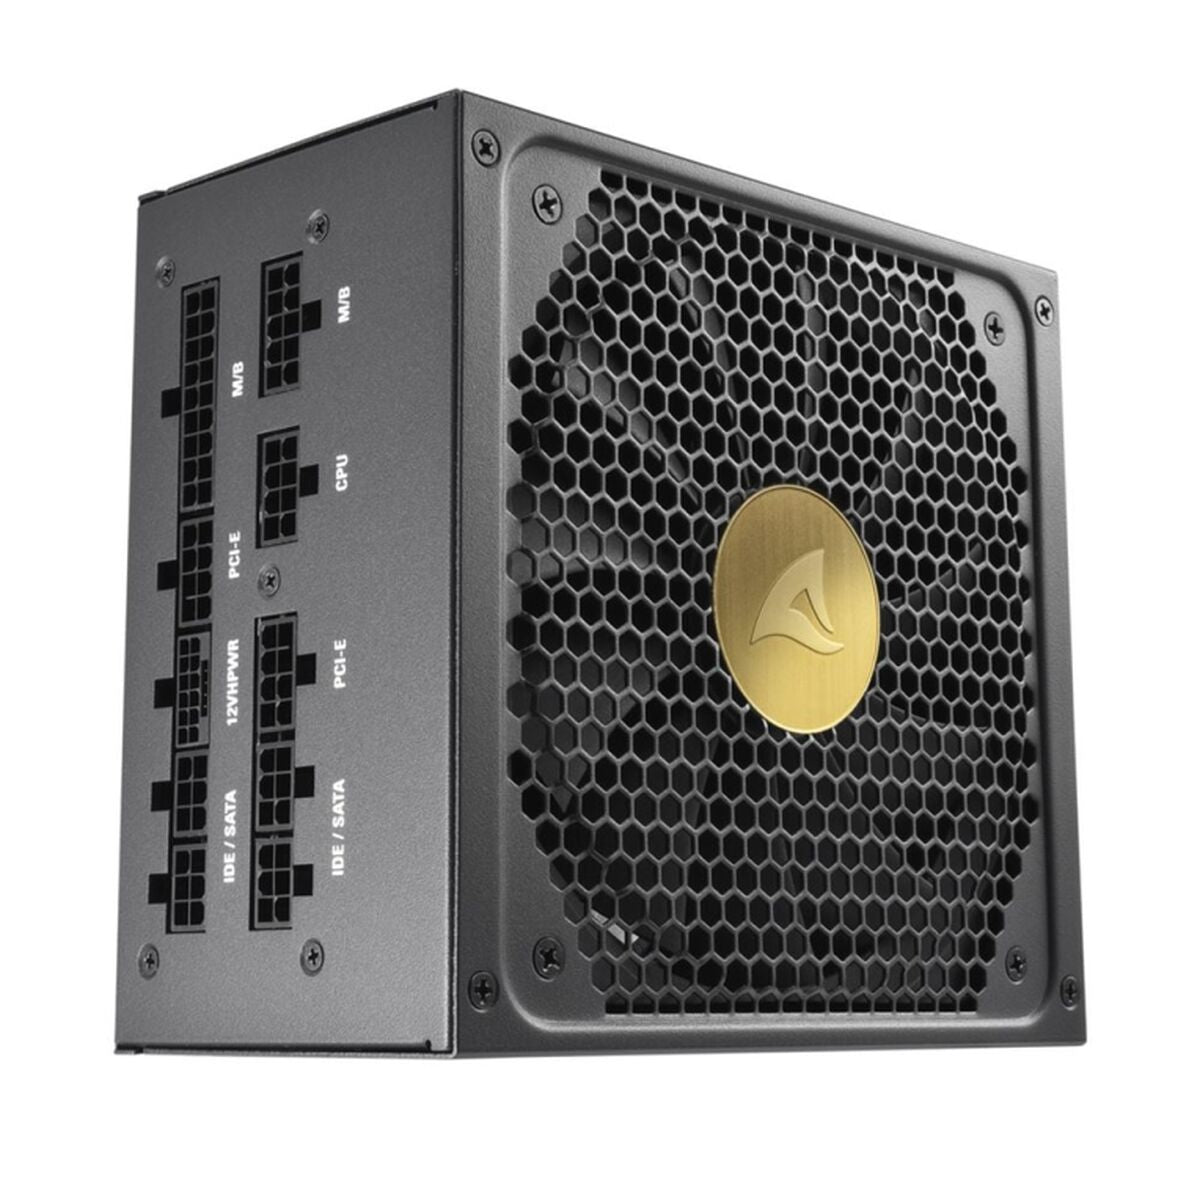 Power supply Sharkoon REBEL P30 GOLD 850 W 80 Plus Gold, Sharkoon, Computing, Components, power-supply-sharkoon-rebel-p30-gold-850-w-80-plus-gold, Brand_Sharkoon, category-reference-2609, category-reference-2803, category-reference-2816, category-reference-t-19685, category-reference-t-19912, category-reference-t-21360, category-reference-t-25656, computers / components, Condition_NEW, ferretería, Price_100 - 200, Teleworking, RiotNook